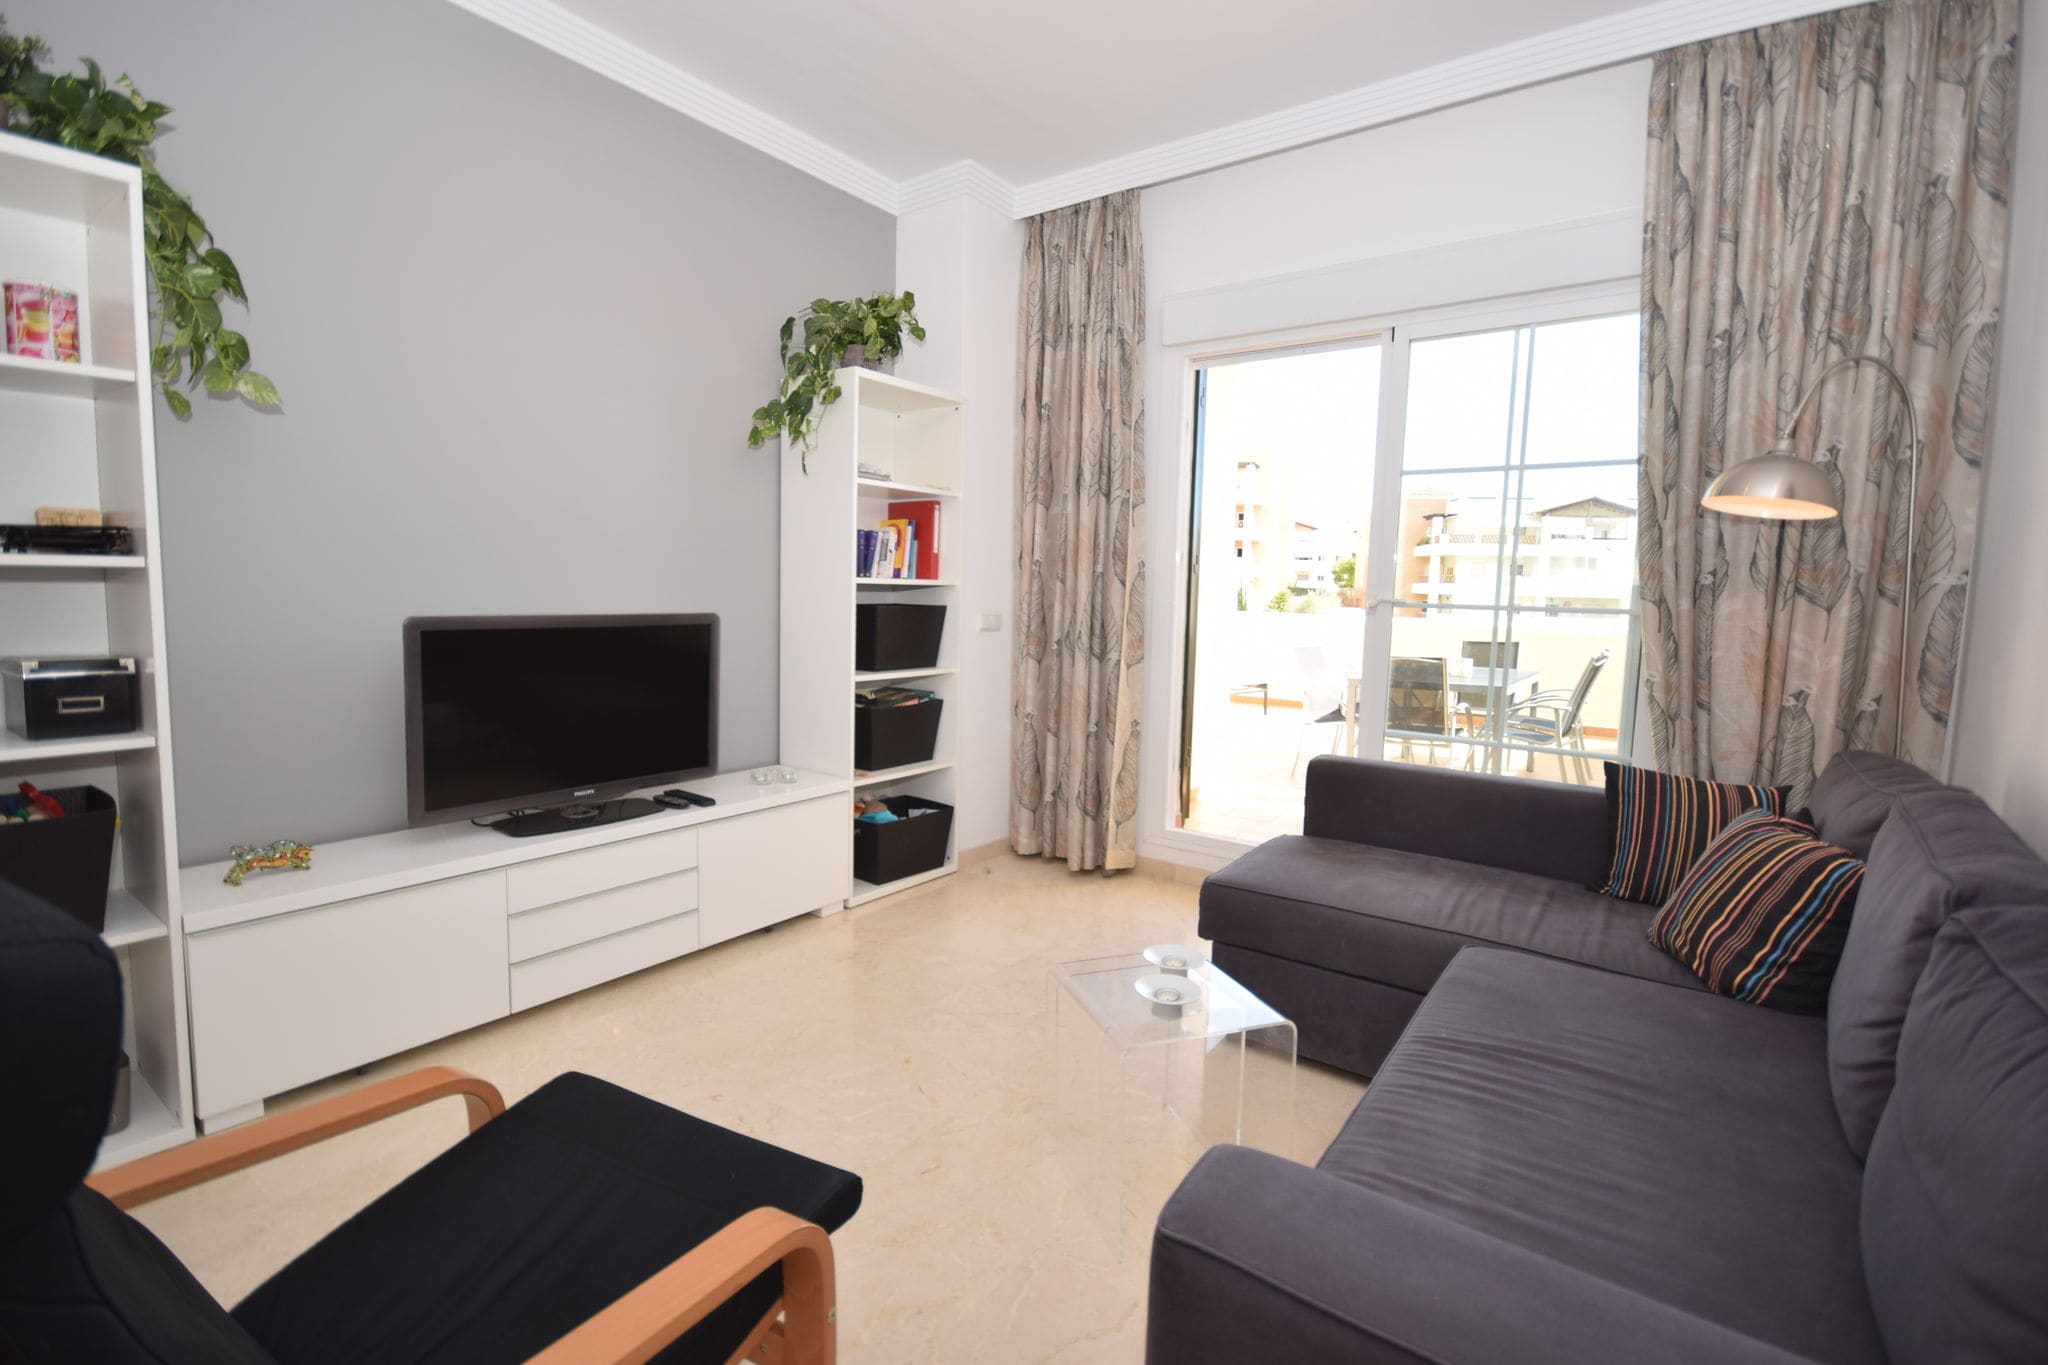 Comfortable apartment on the golf course, near the beach and activities